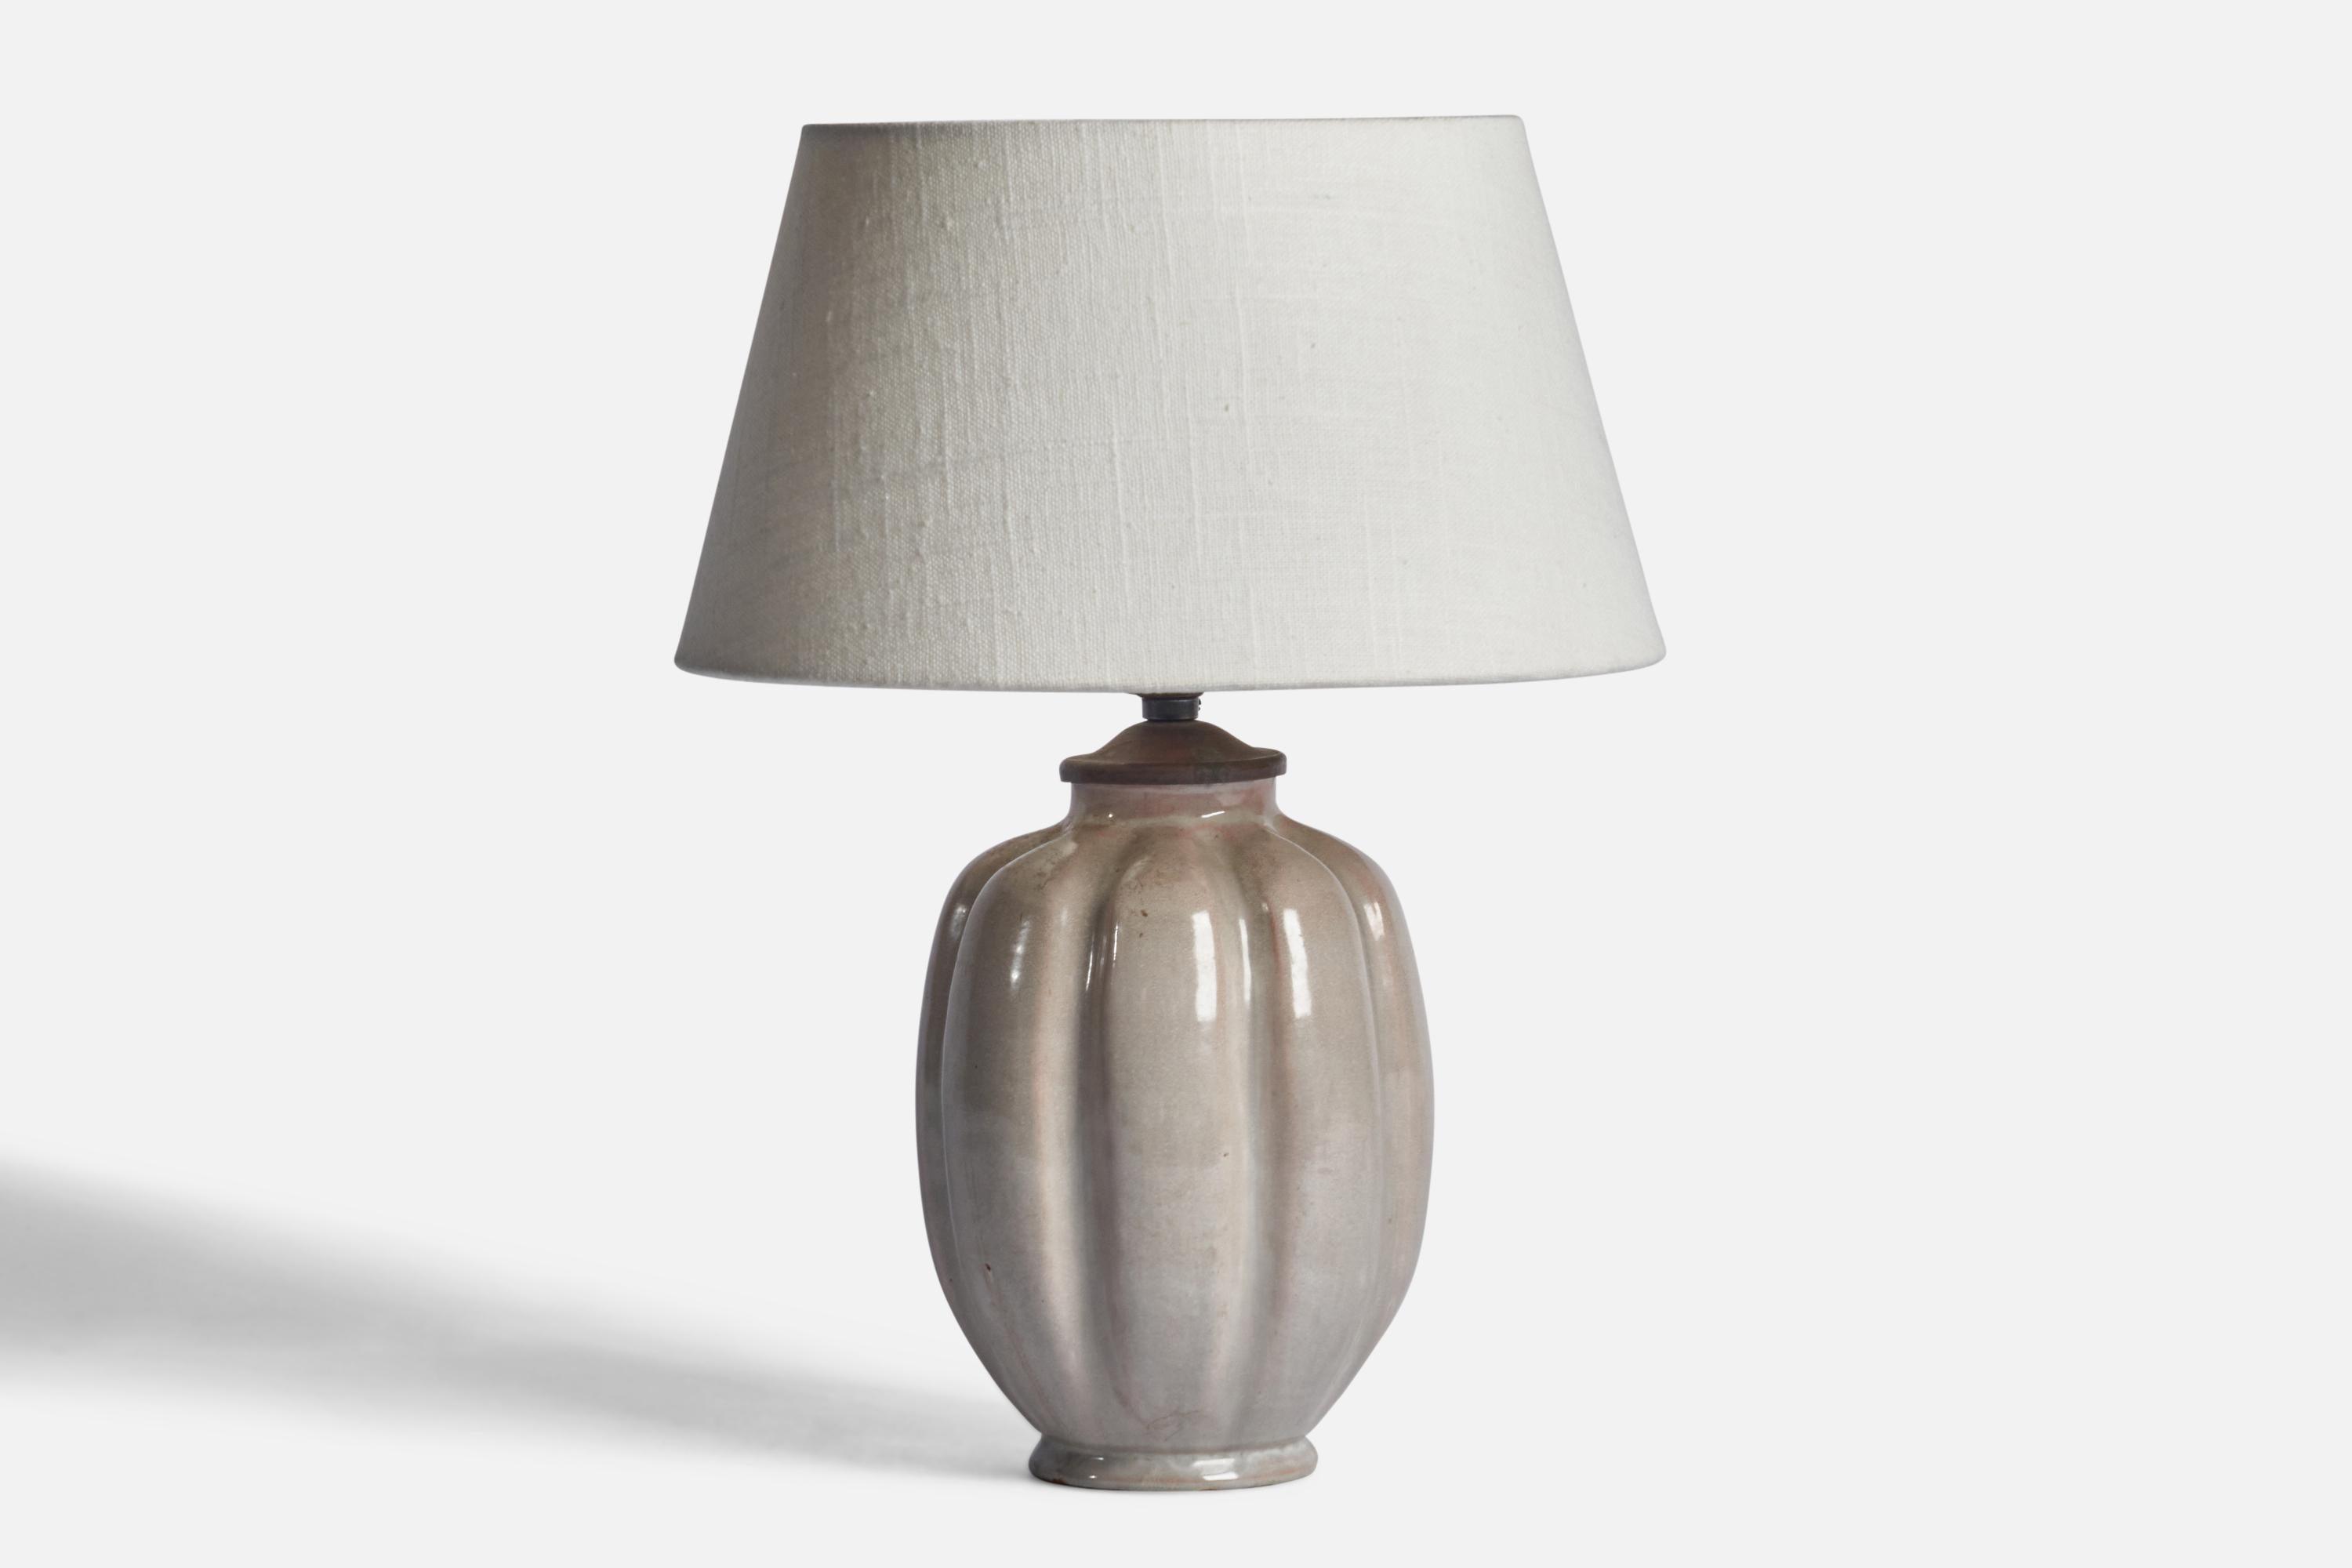 A light grey-glazed and fluted earthenware table lamp designed and produced by Nittsjö, Sweden, 1940s.

Dimensions of Lamp (inches): 10.5